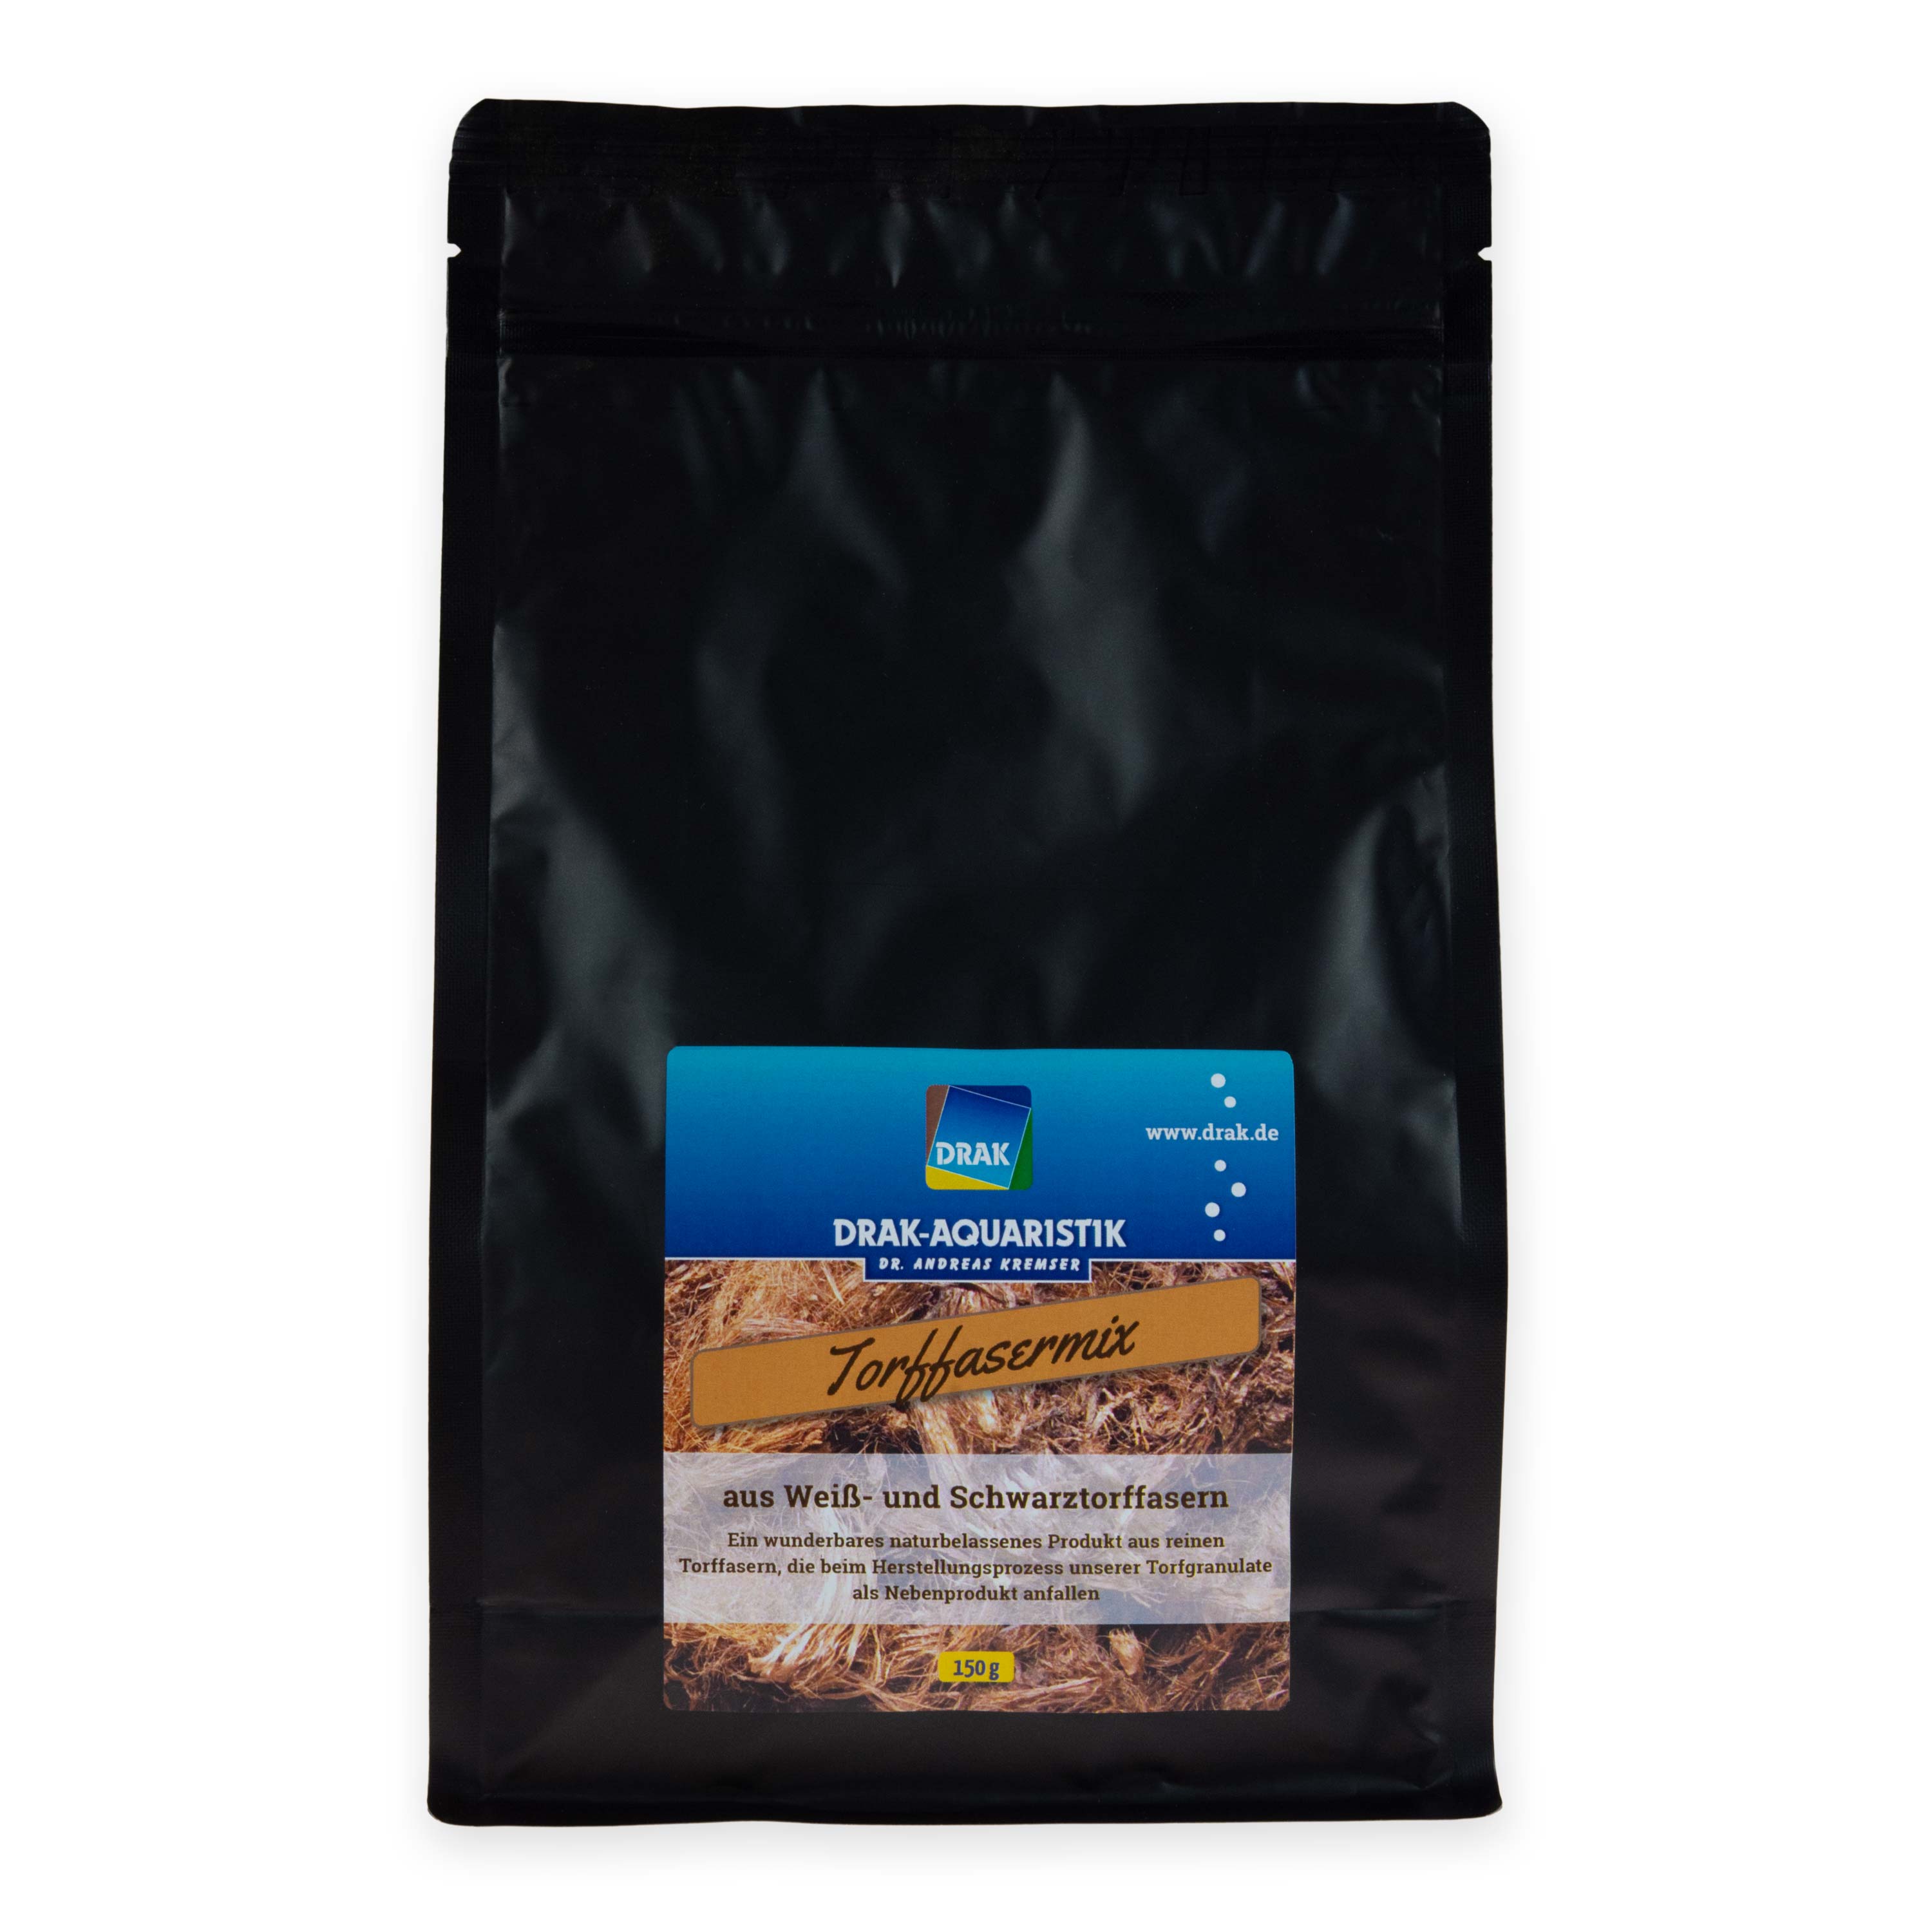 Peat fibre mixture from white and black peat 150 g Boxpack